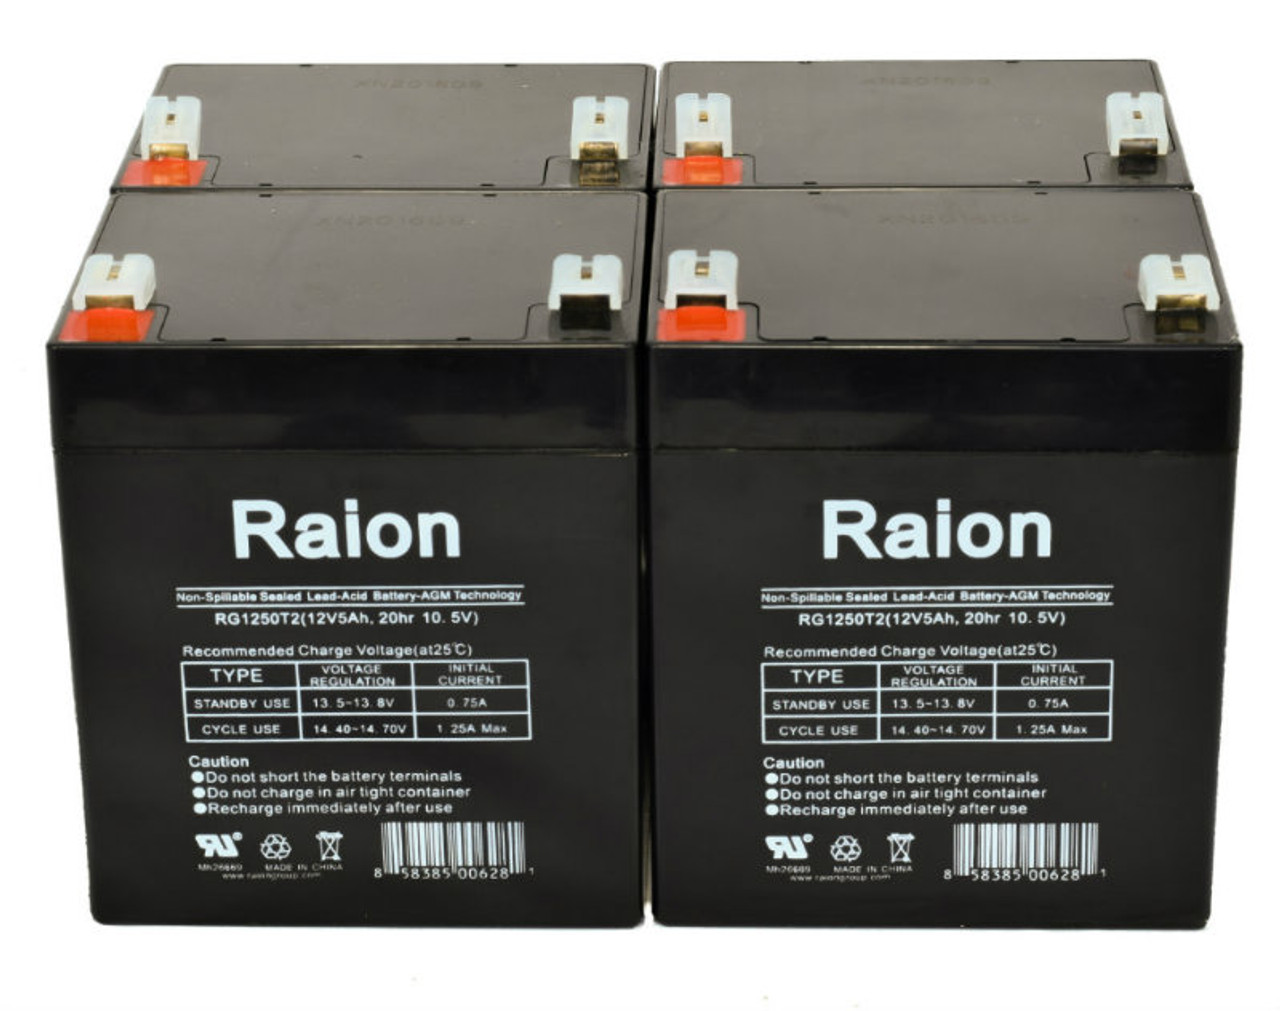 Raion Power 12V 5Ah RG1250T2 Replacement Lead Acid Battery for Fengri 6-FM-5.0 - 4 Pack